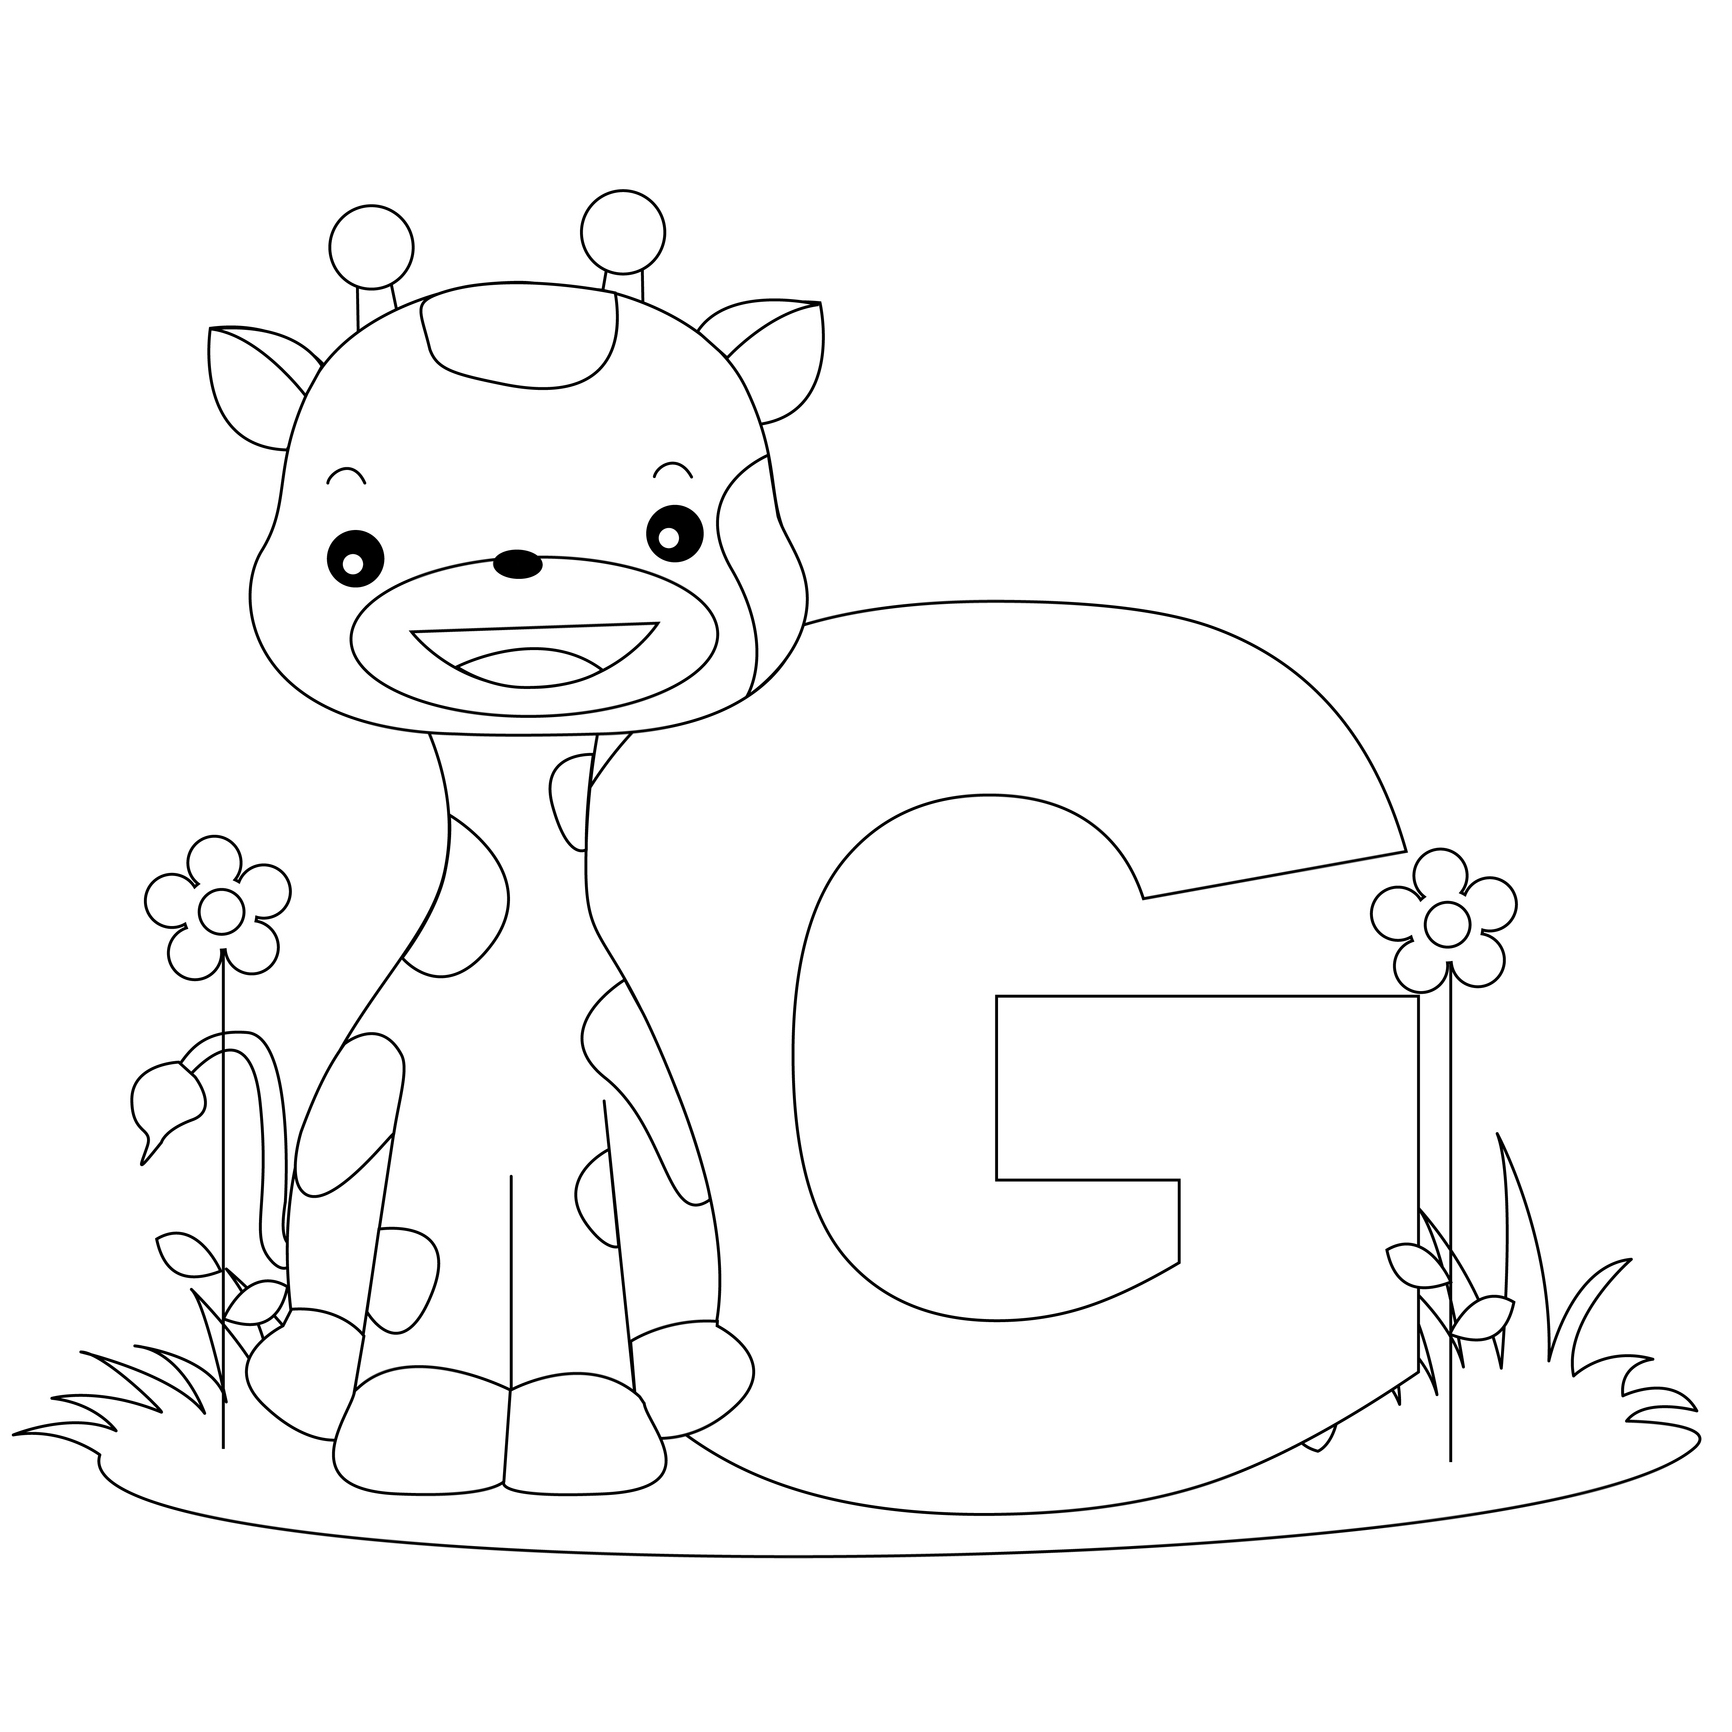 Letter G Coloring Page 11 #9625 - Free Printable Letter G Coloring Pages